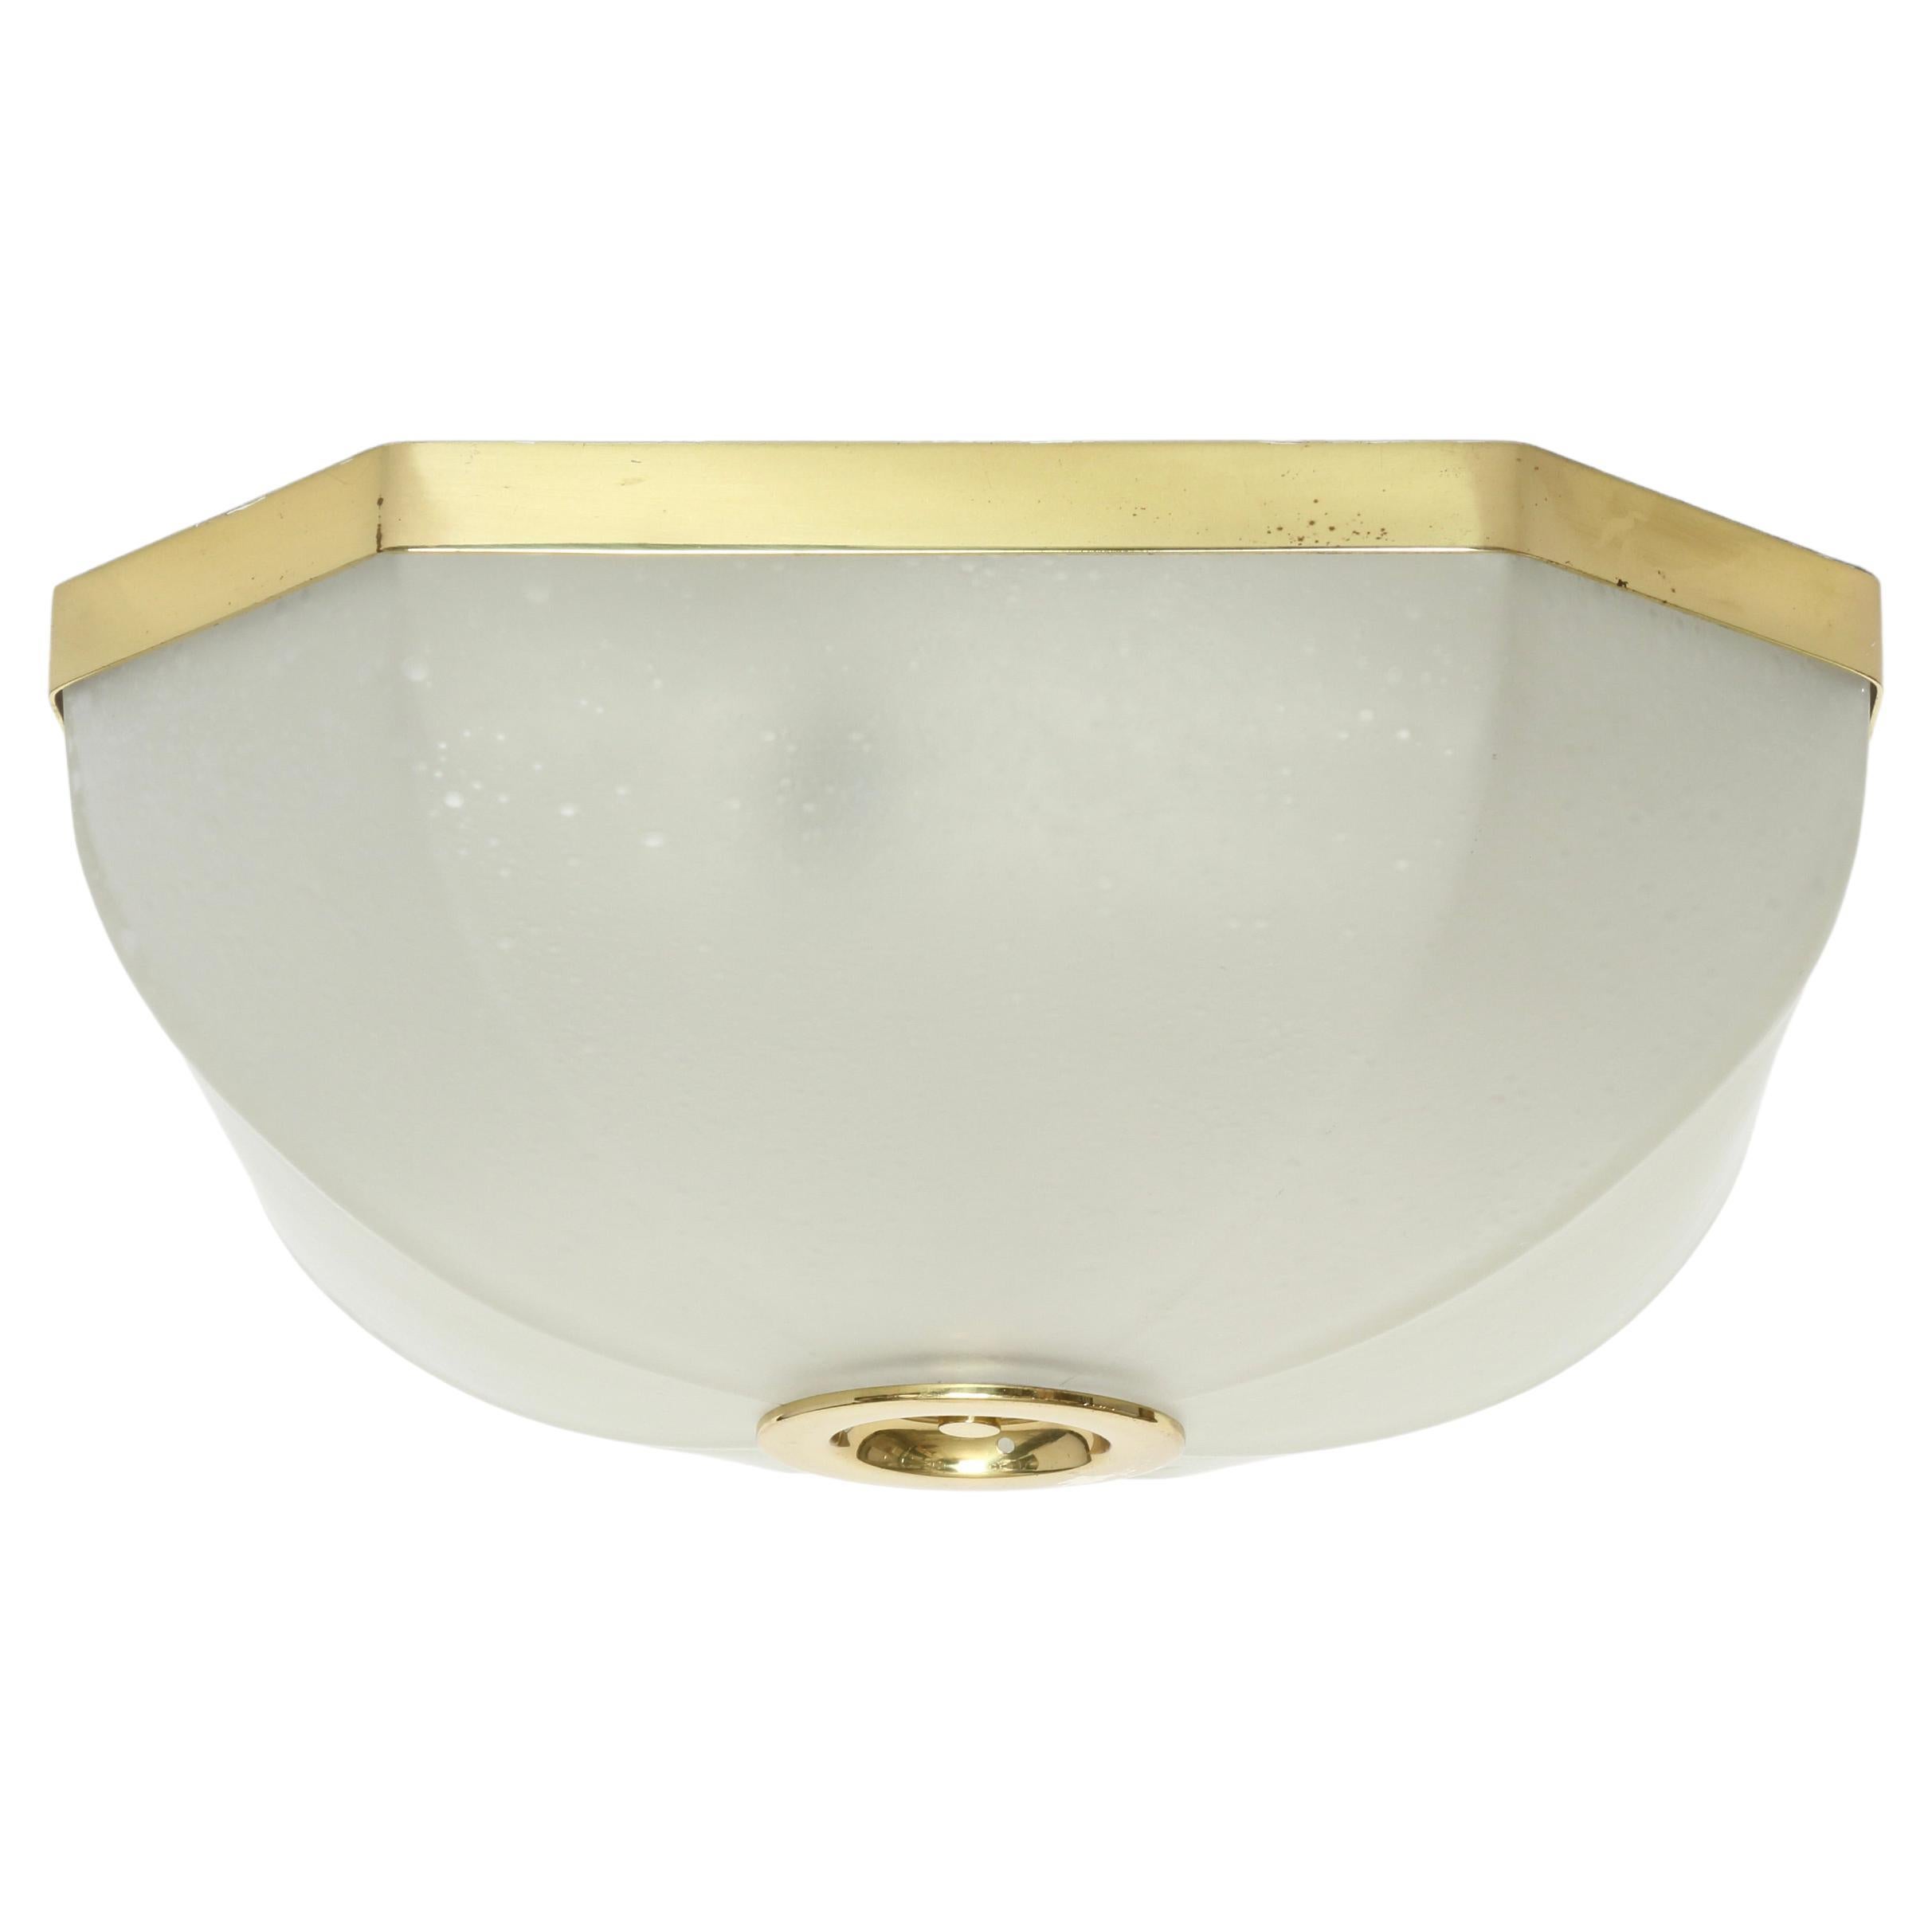 Flush Mount Ceiling Light by Lumi, circa 1950s For Sale